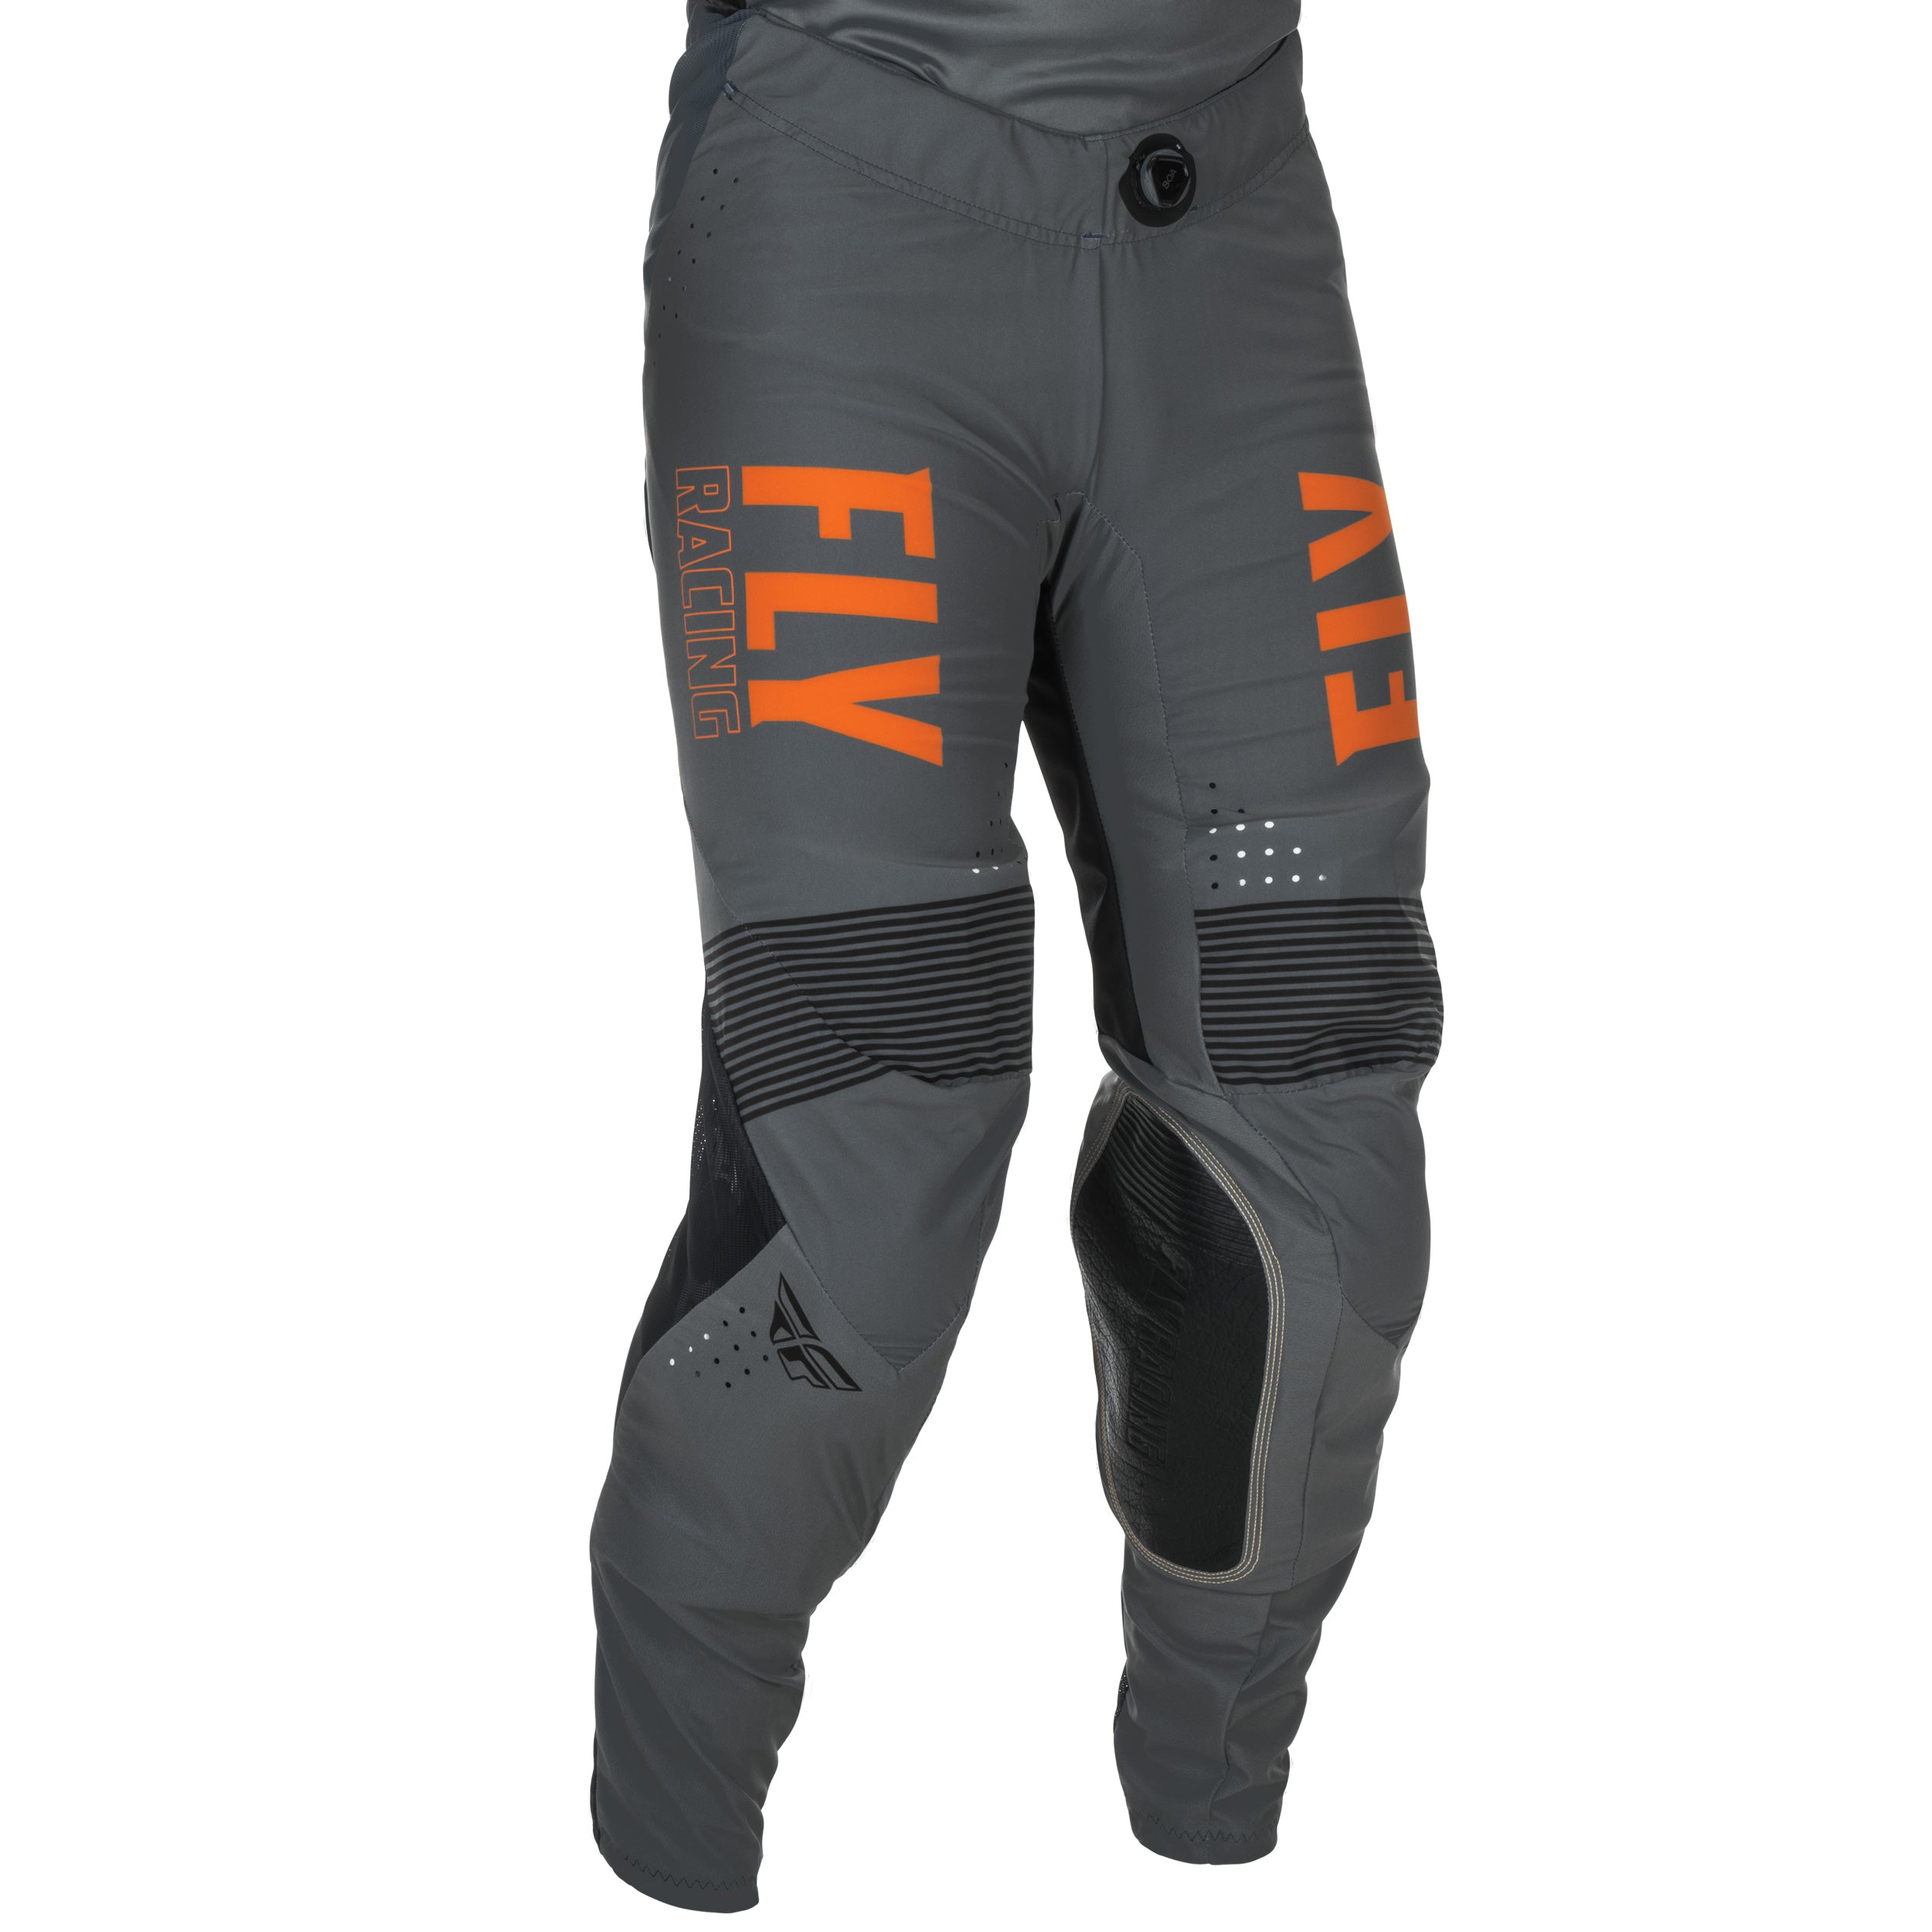 FLY LITE PANTS GRY/ORG/BLK 34  (374-73634)